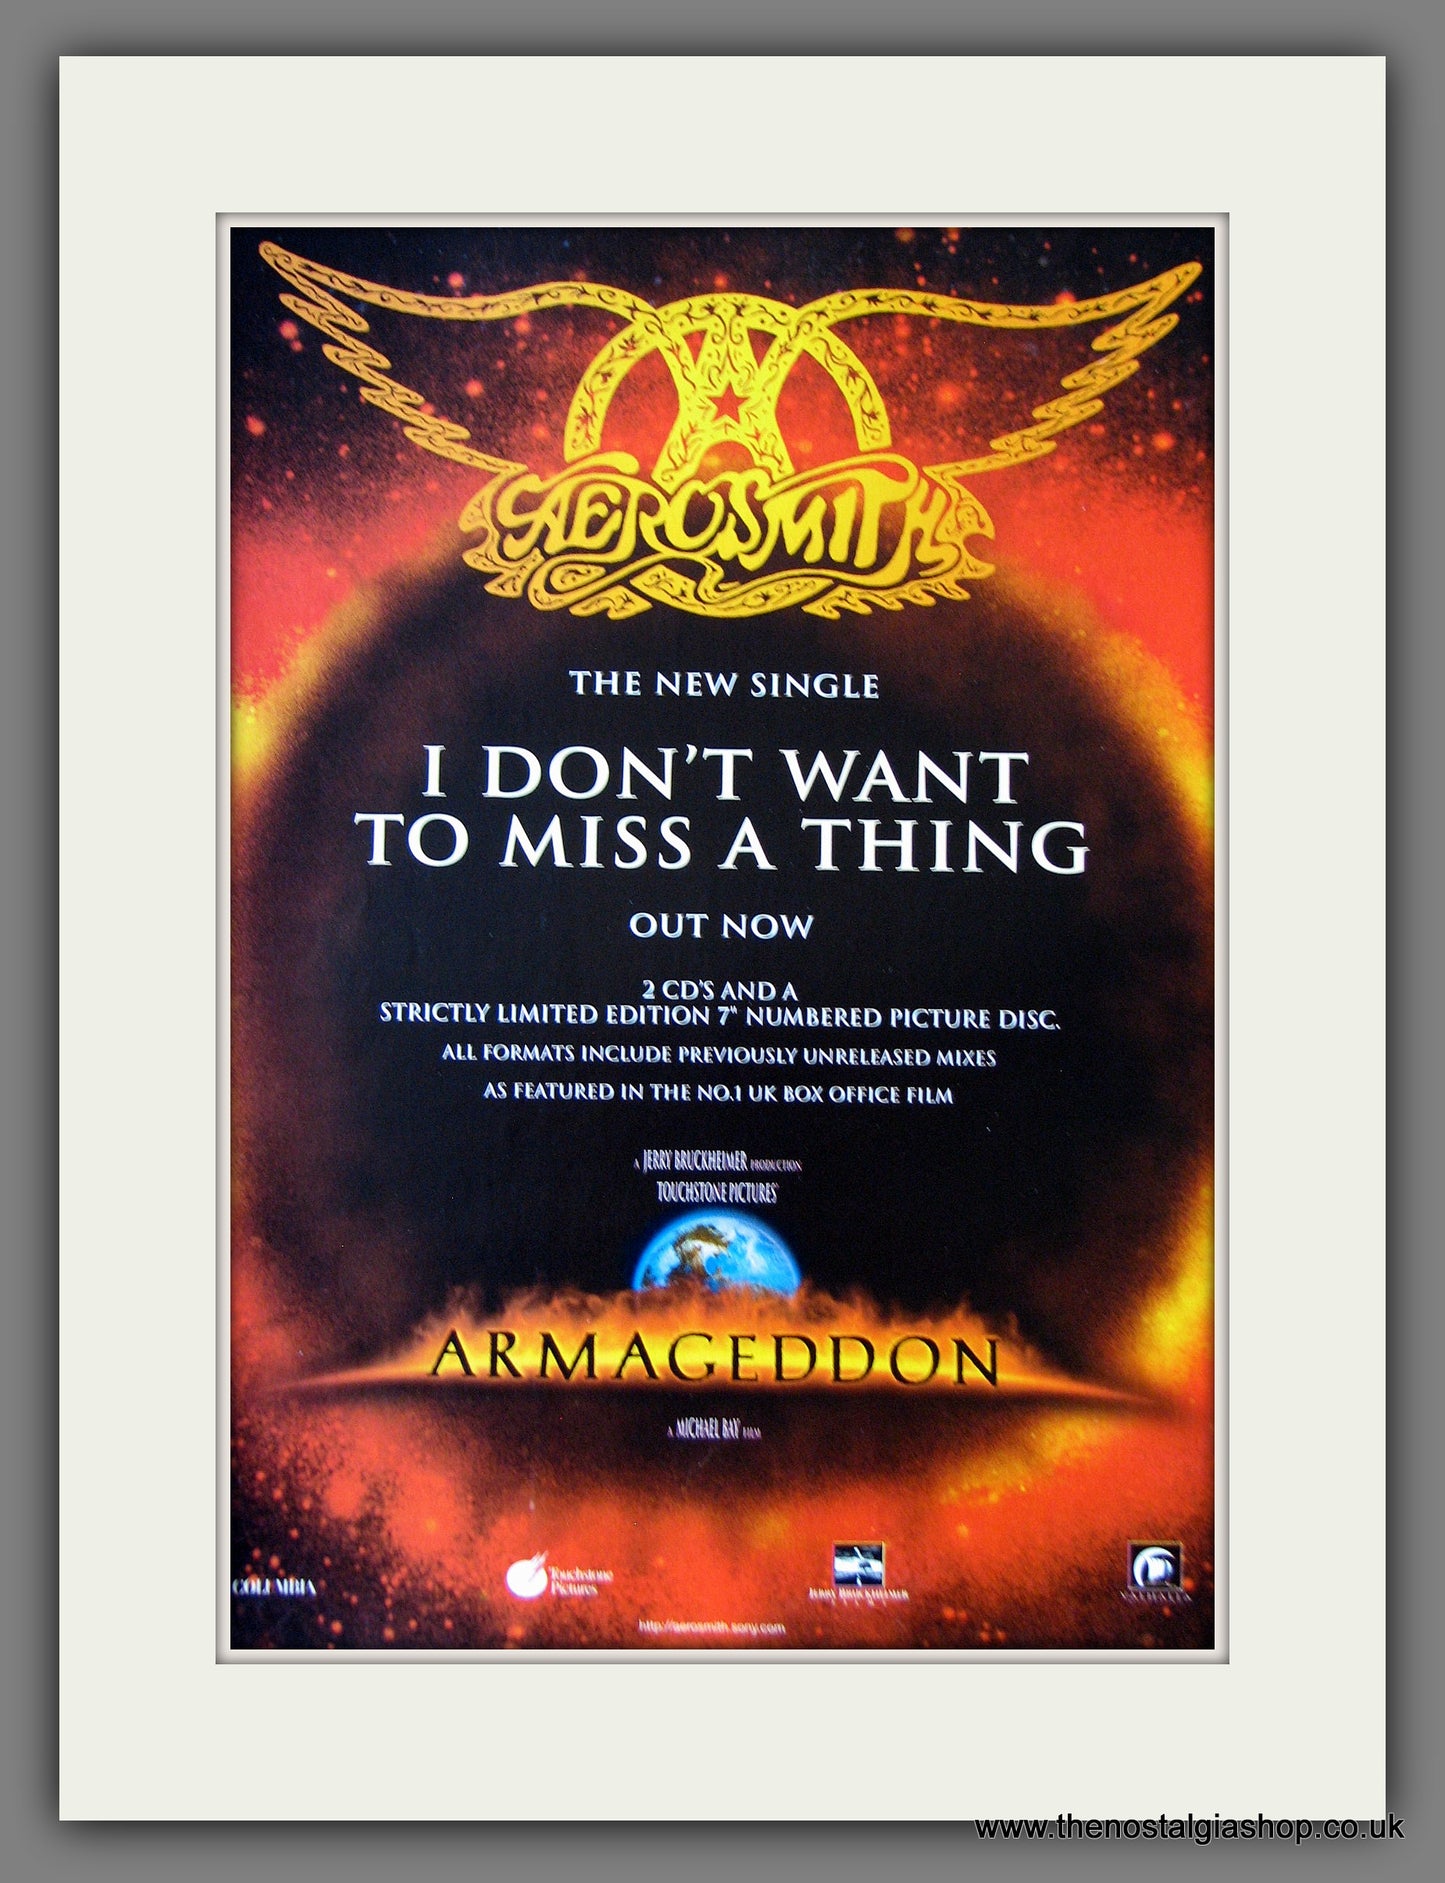 Aerosmith. I Don't Want To Miss A Thing. Original Music Advert 1998 (ref AD55593)